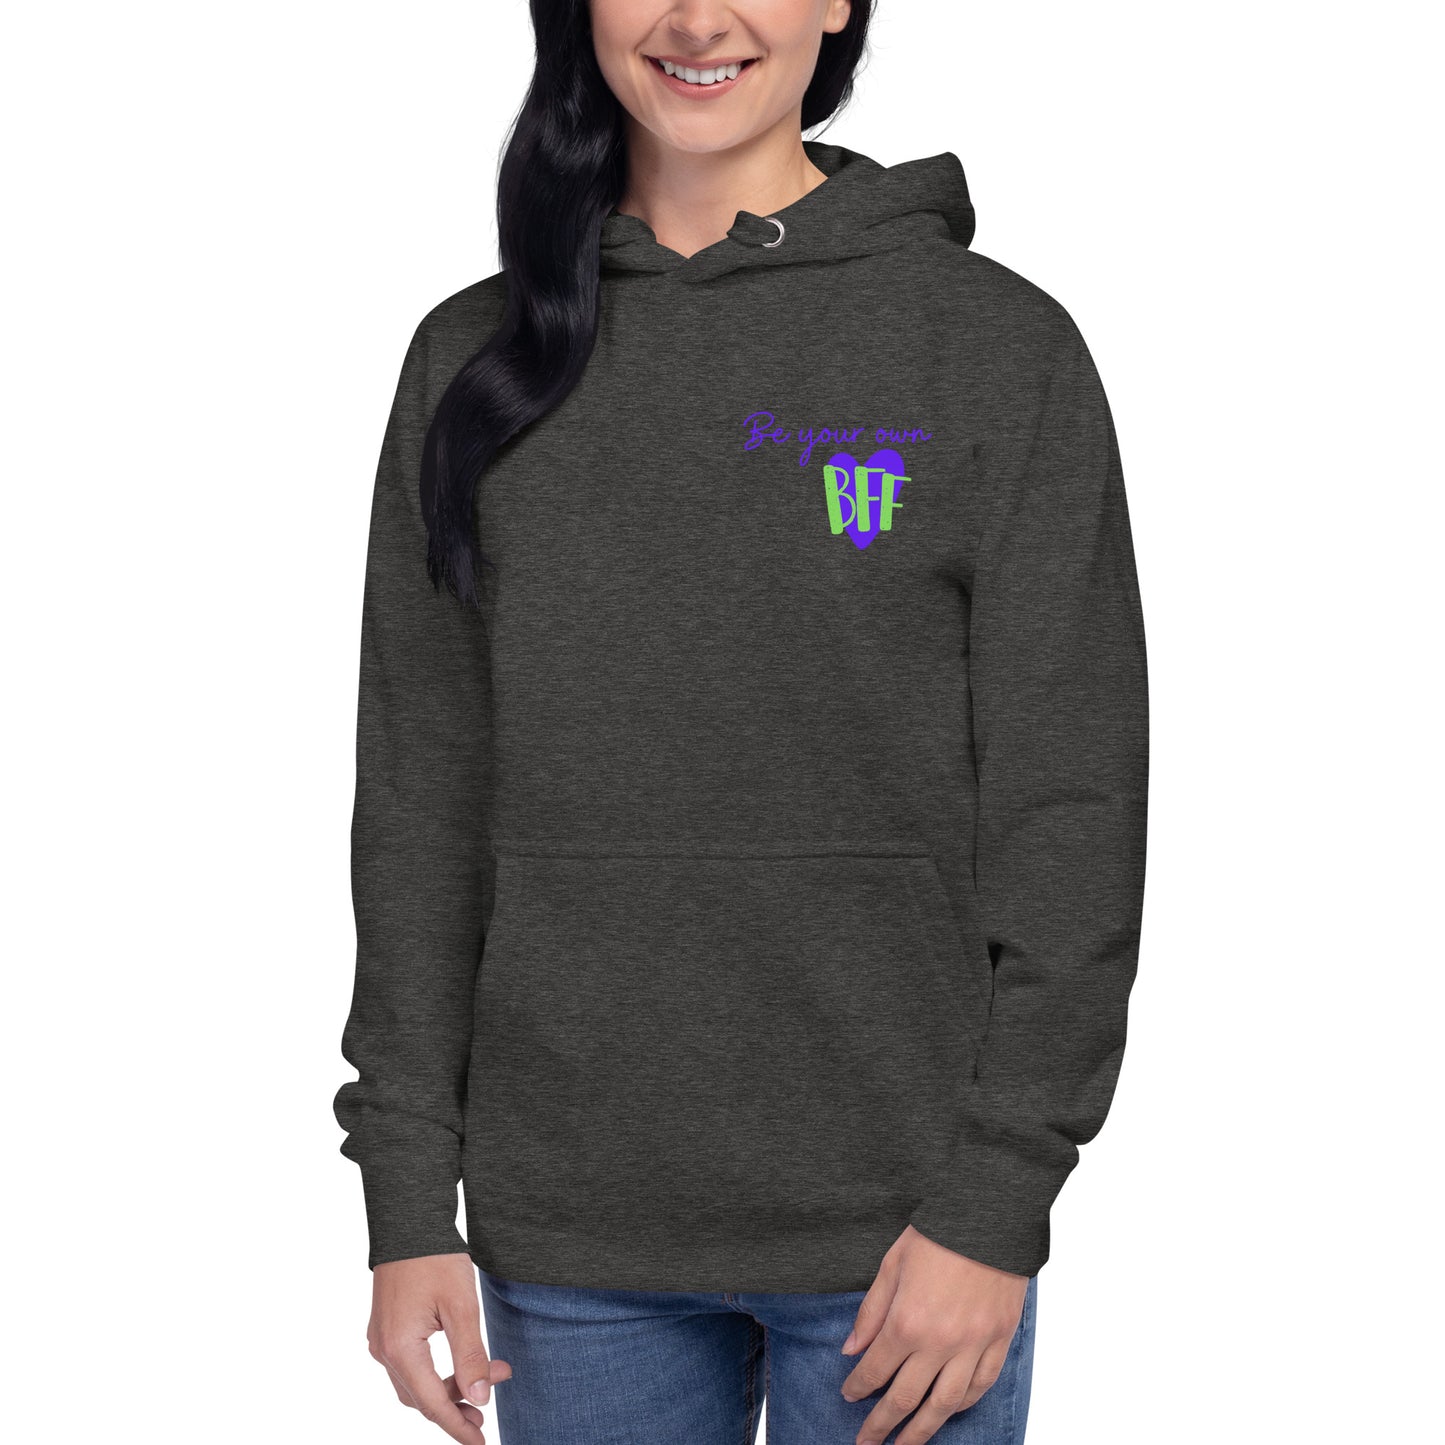 Unisex Hoodie - Be your own BFF (front and back)